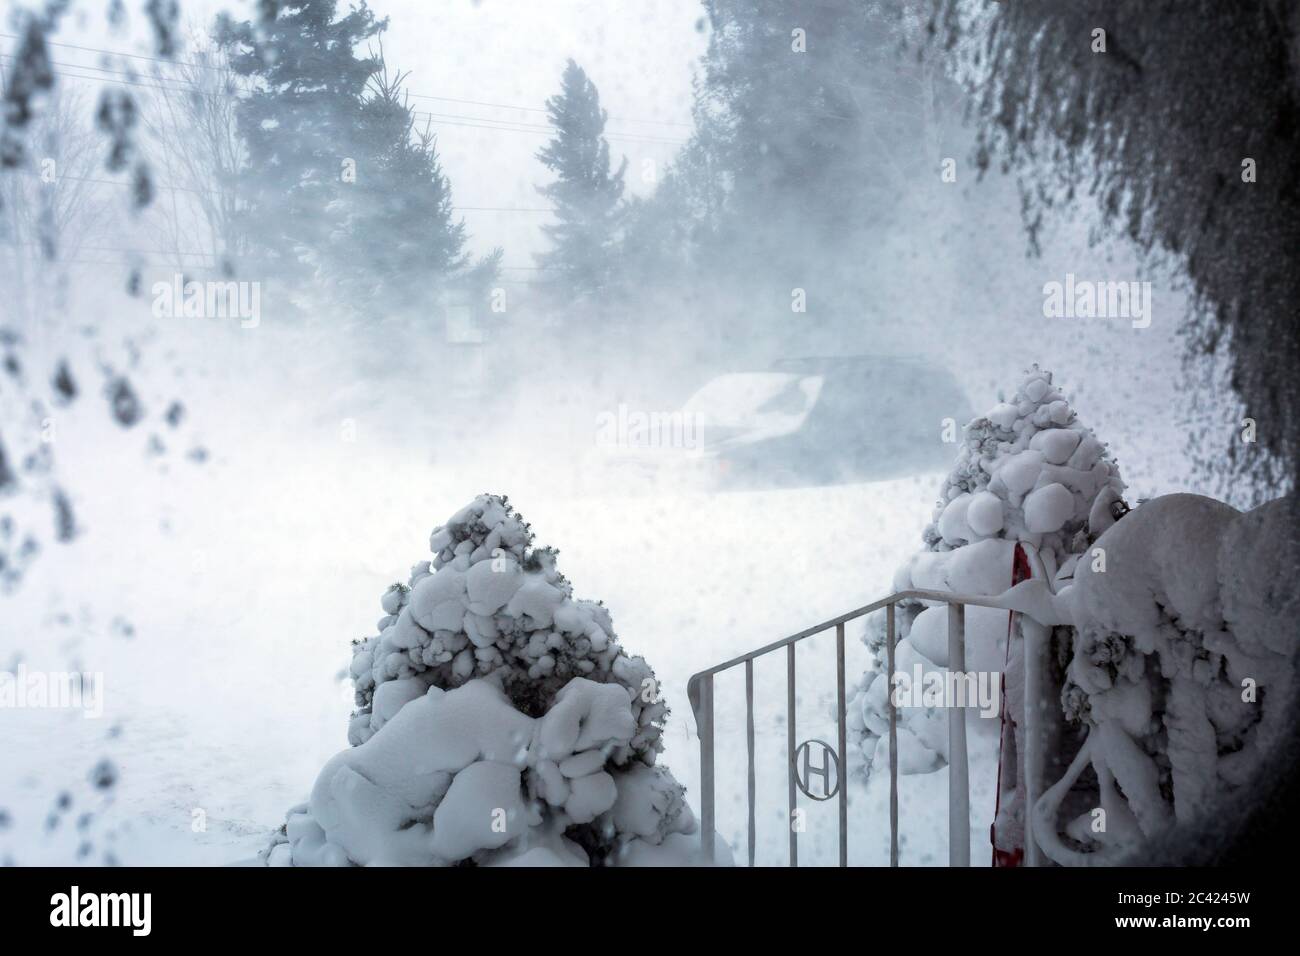 view from window showing blowing snow and strong winds Stock Photo